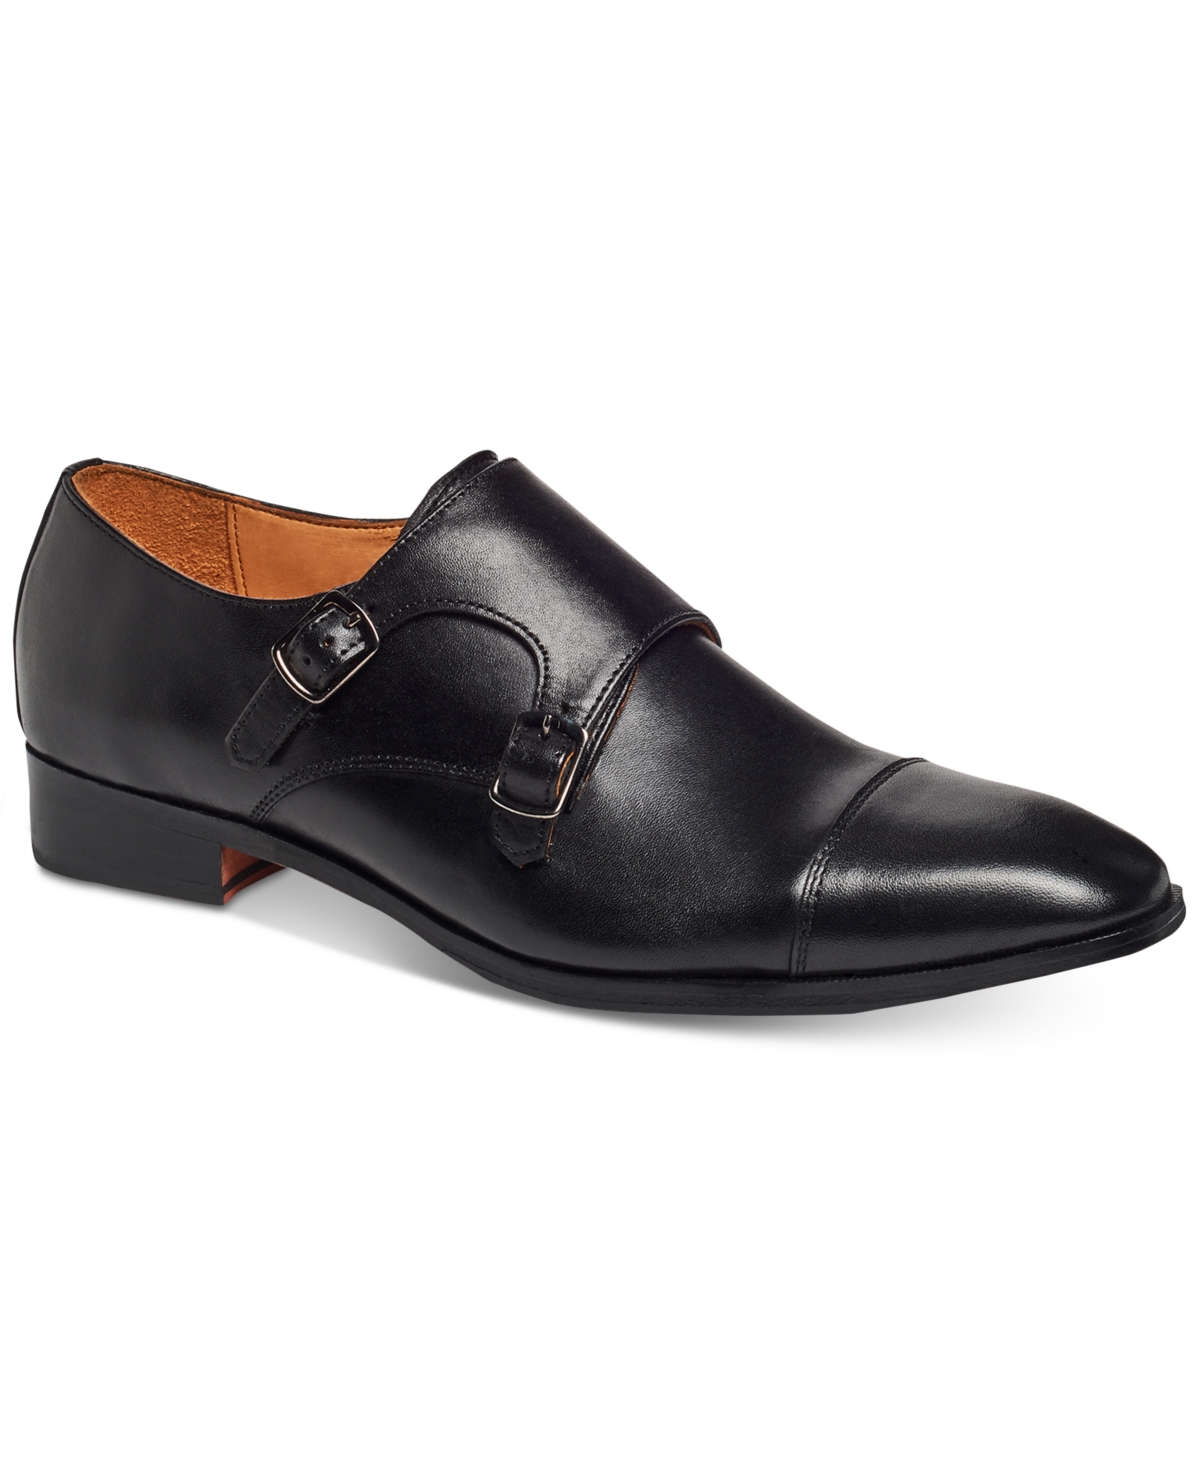 Men's Passion Double Monk-Strap Loafers - Oxford